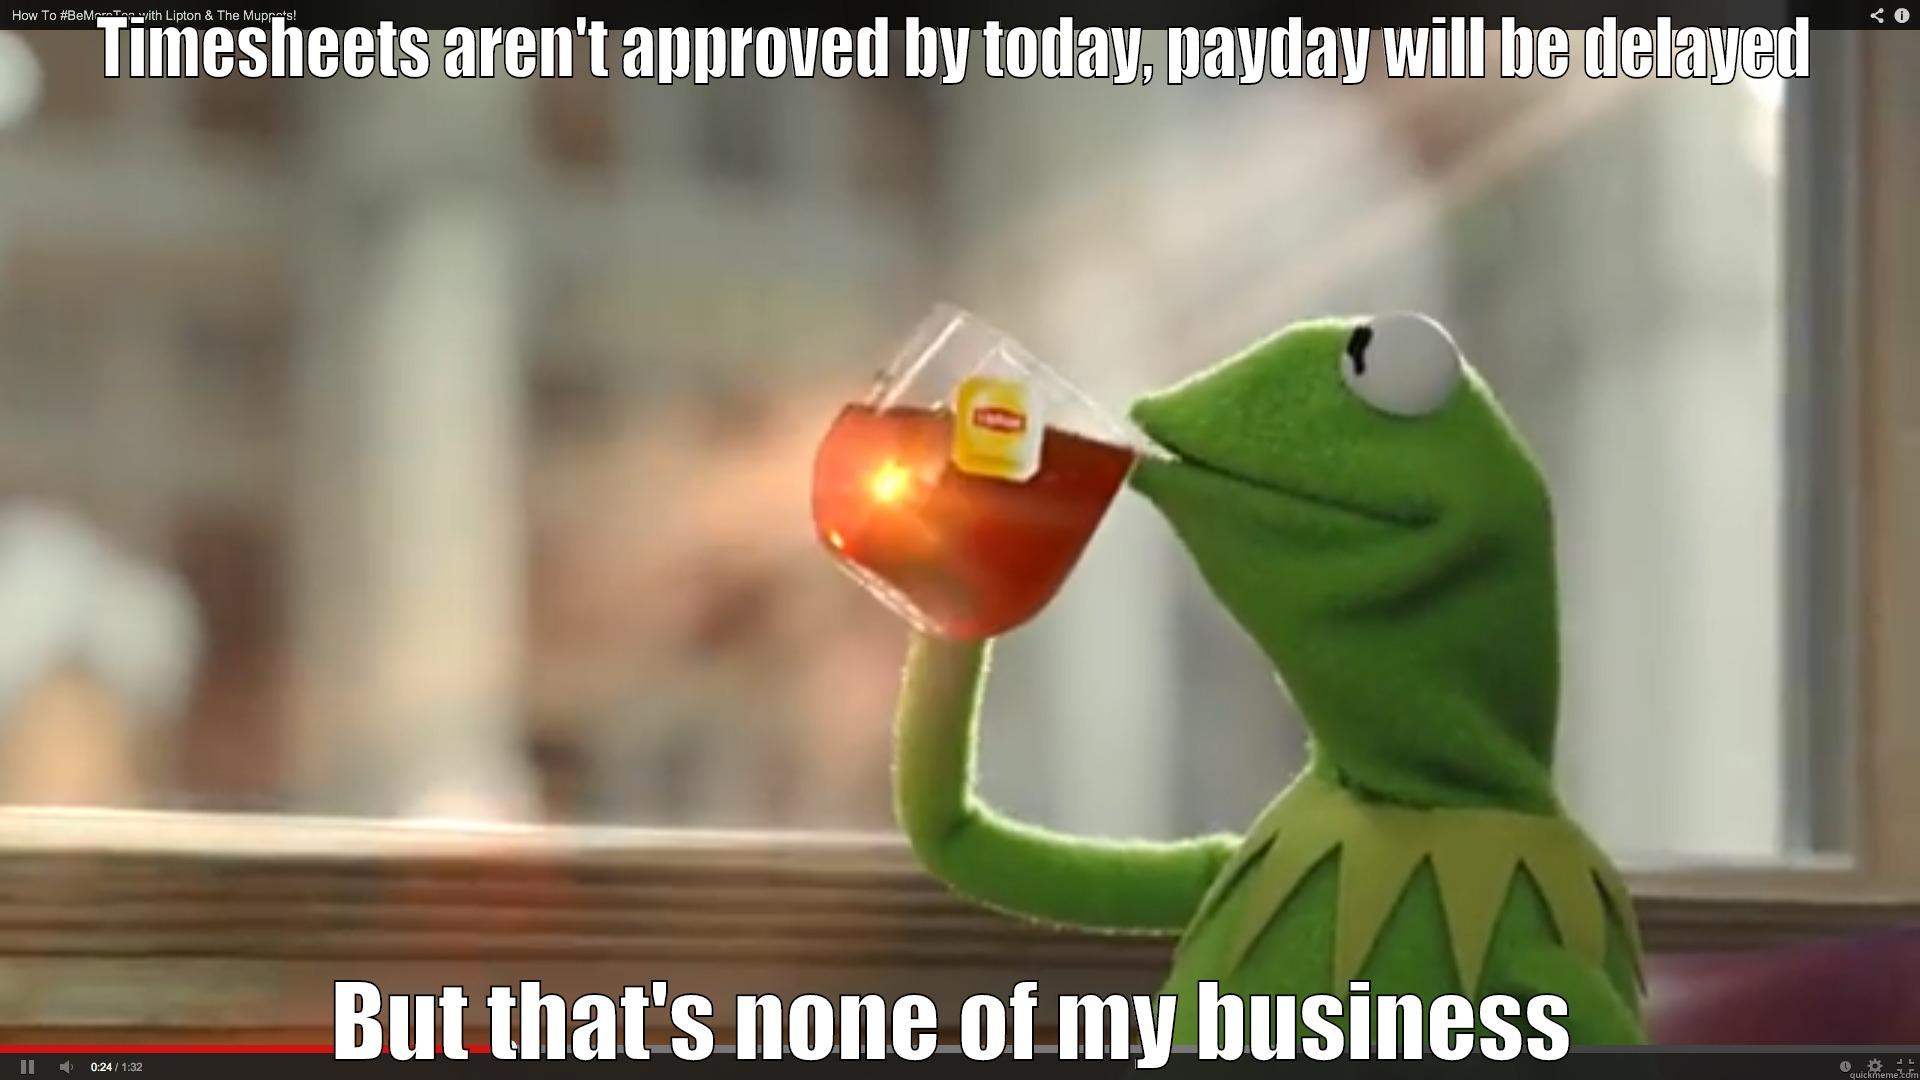 TIMESHEETS AREN'T APPROVED BY TODAY, PAYDAY WILL BE DELAYED BUT THAT'S NONE OF MY BUSINESS Misc